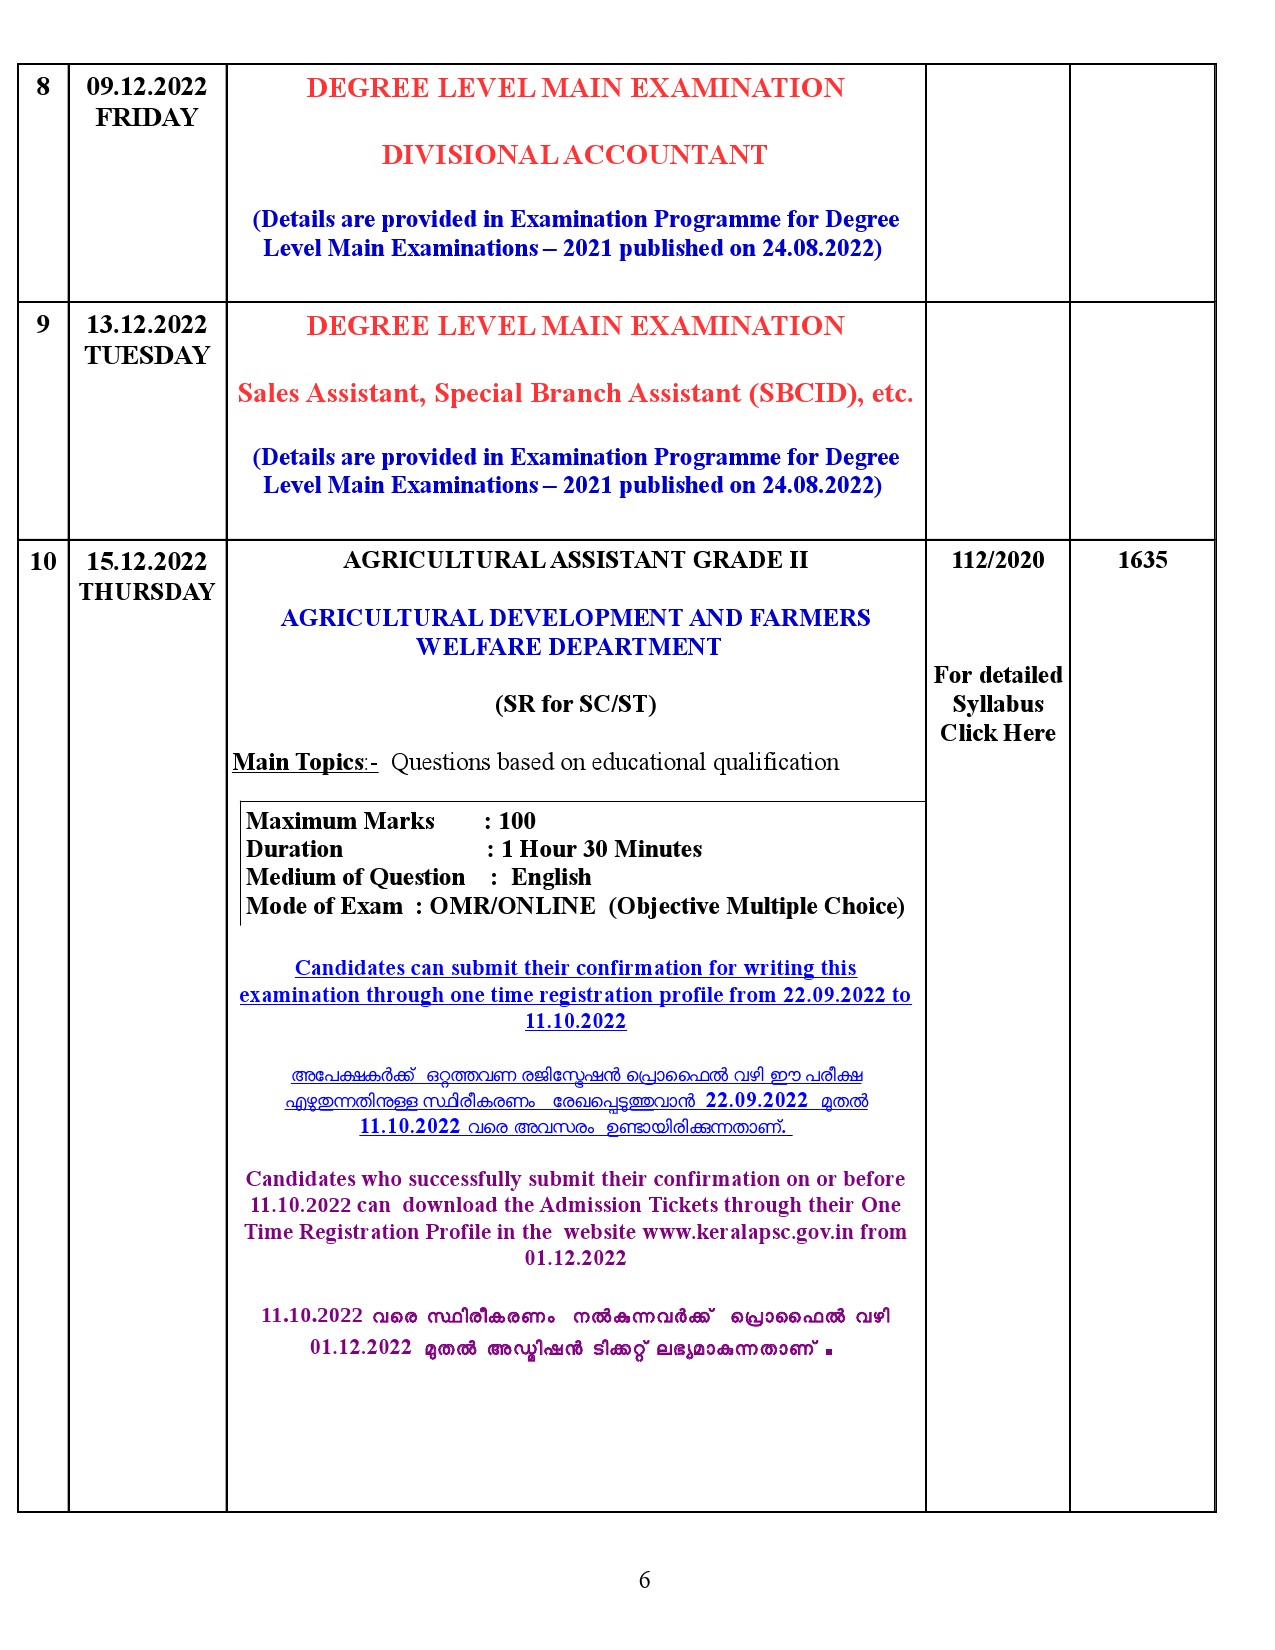 EXAMINATION PROGRAMME FOR THE MONTH OF DECEMBER 2022 - Notification Image 6